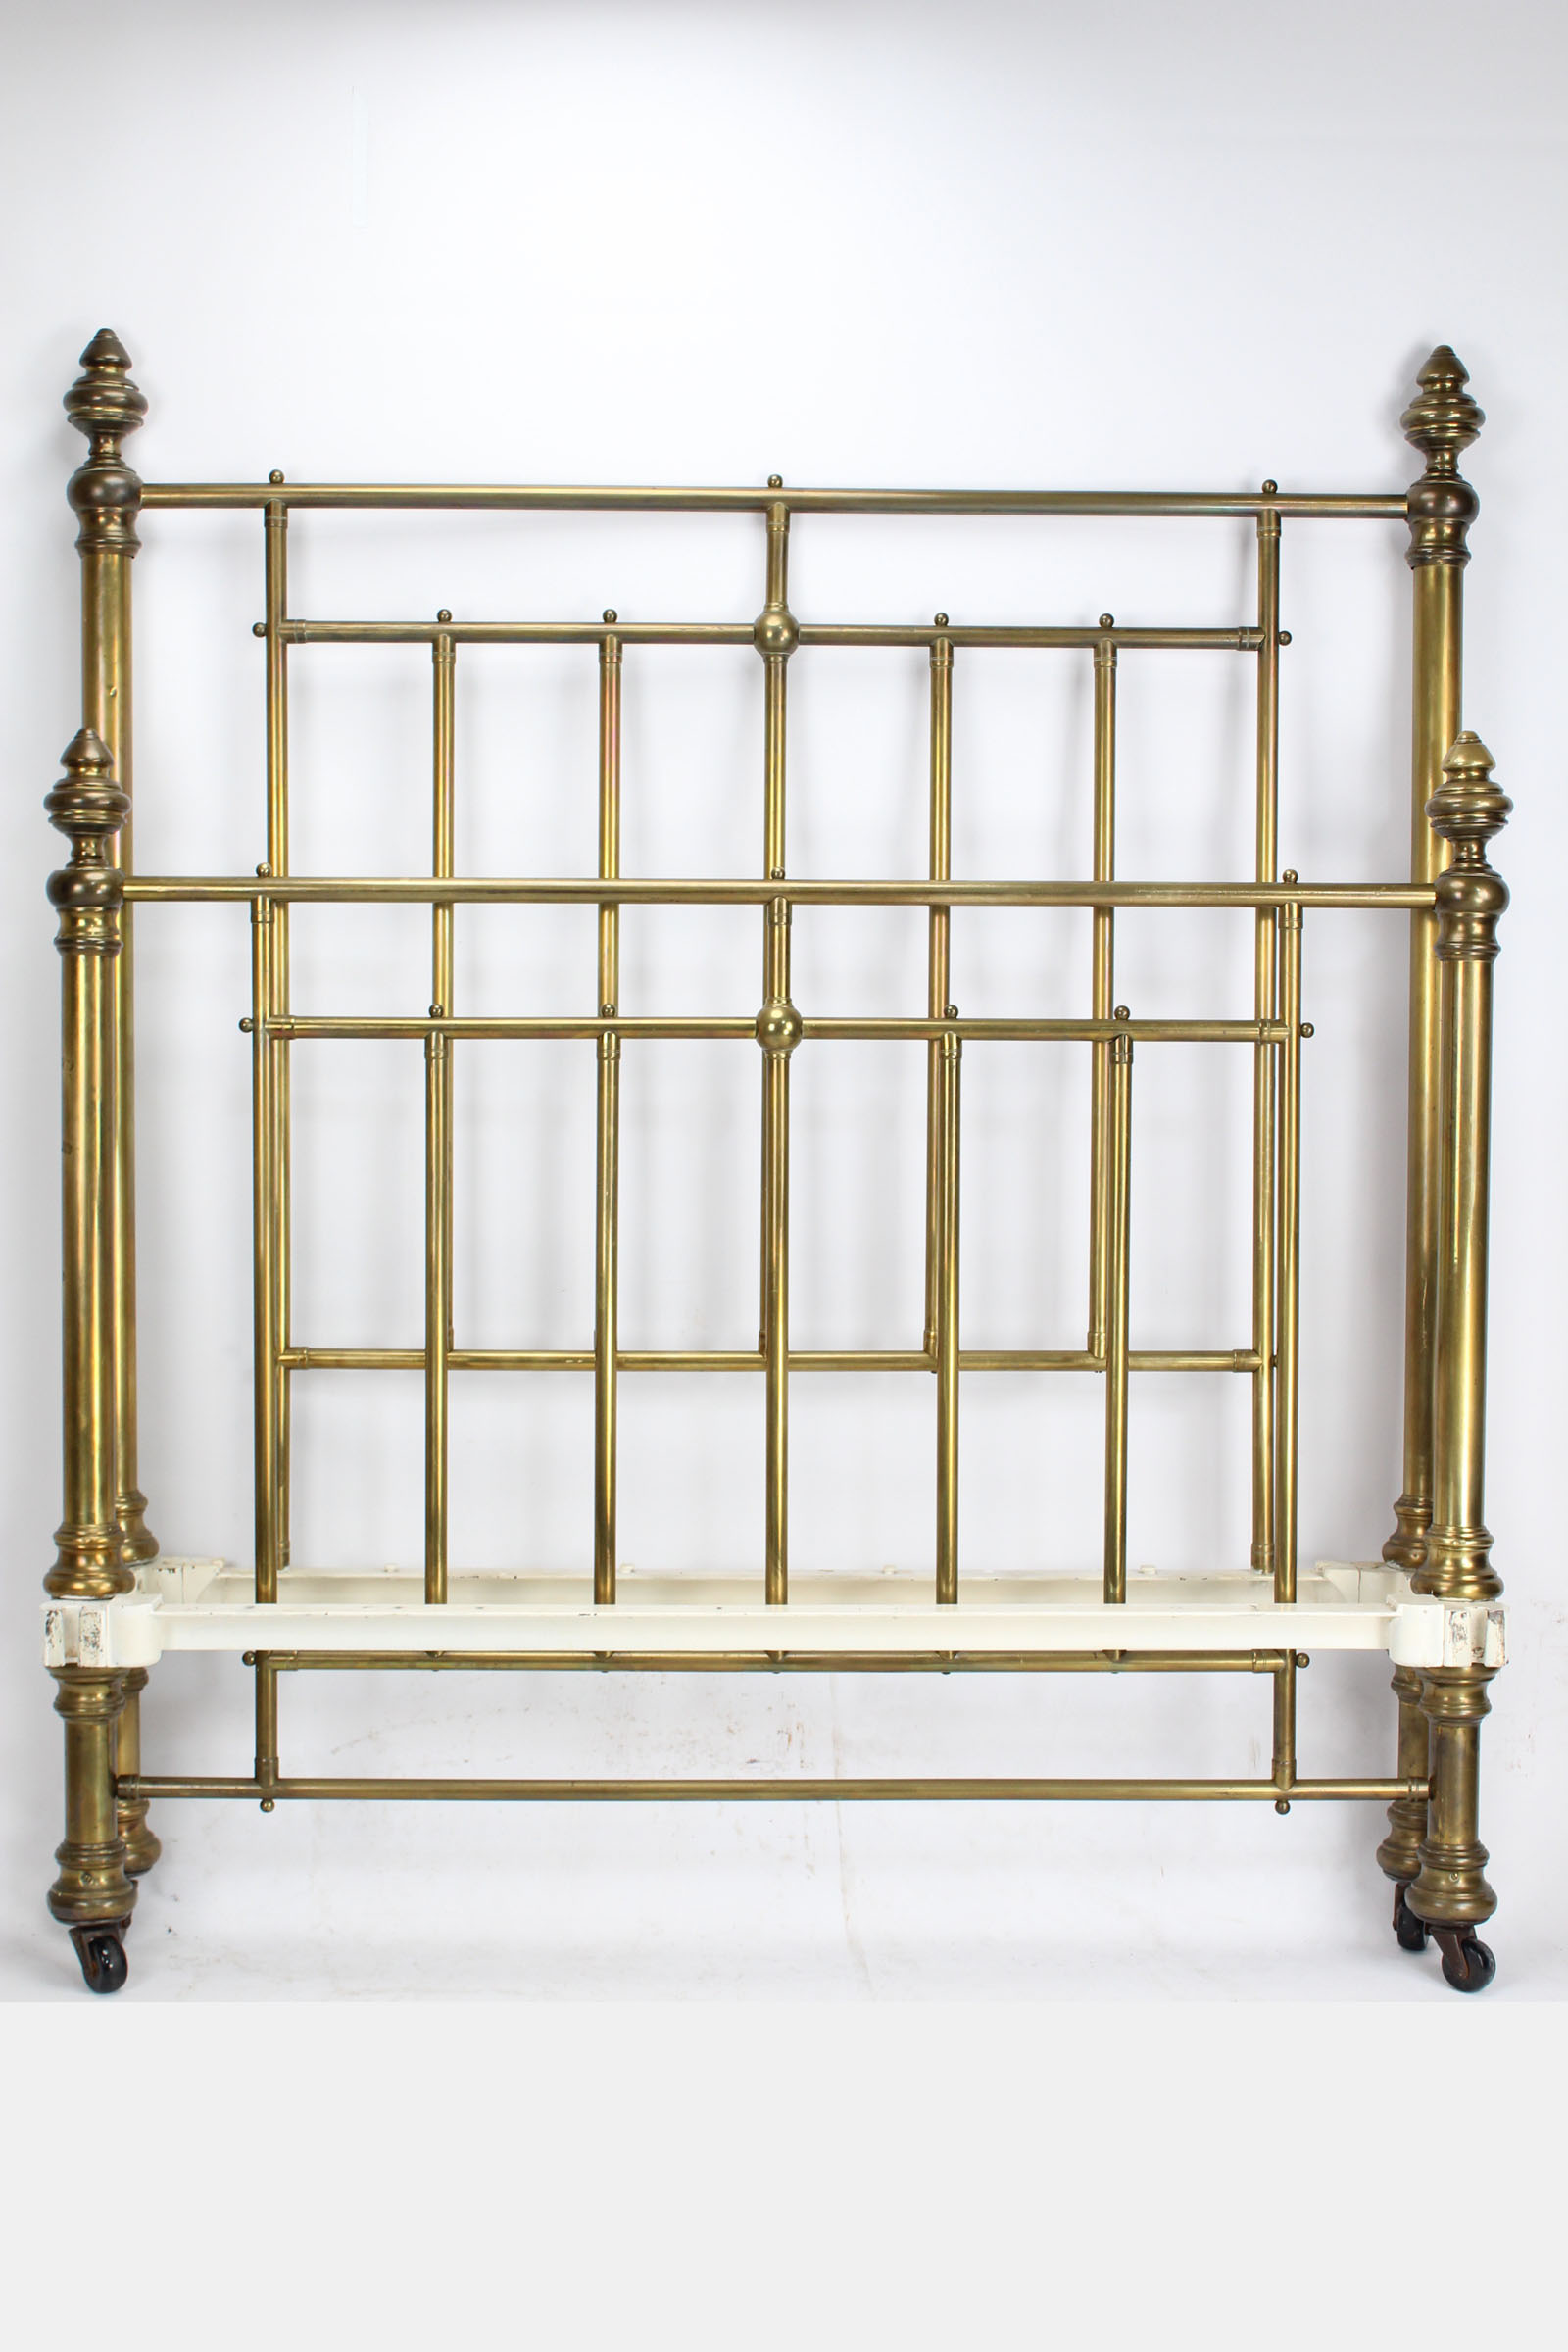 Victorian Brass Double Bed by Hoskins & Sewell - 